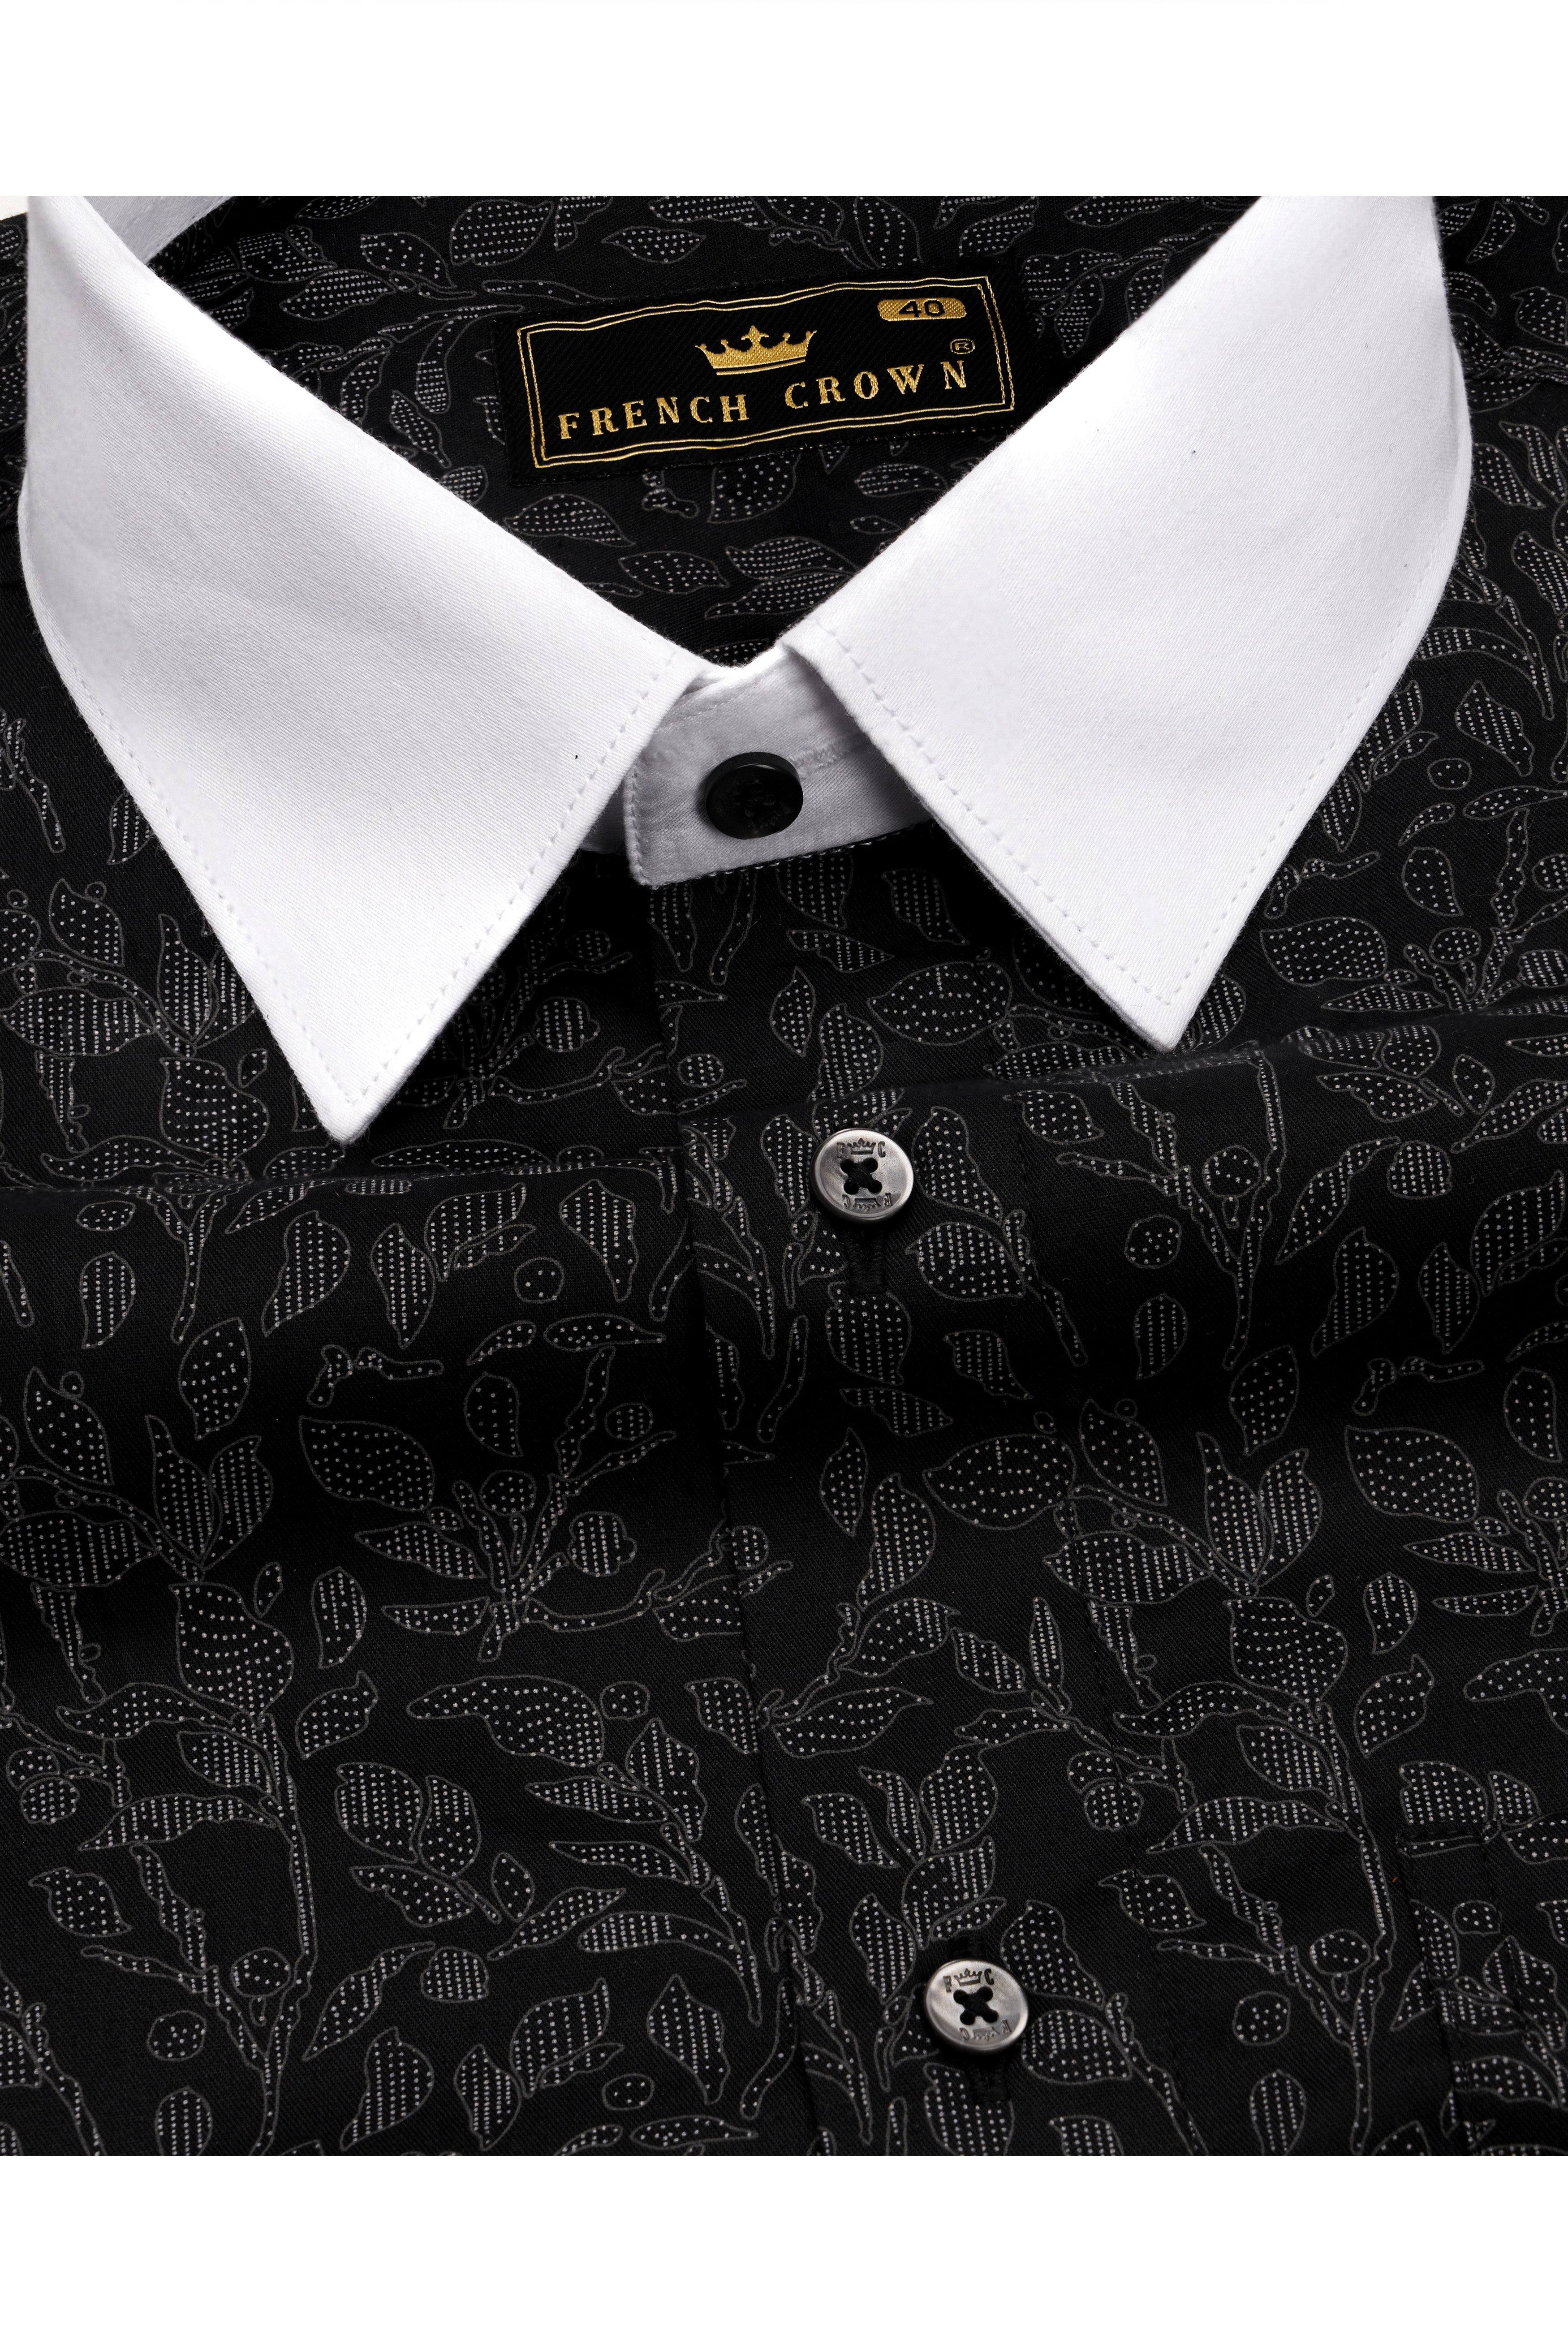 Jade Black Leaves Printed with White Cuffs and Collar Twill Premium Cotton Shirt